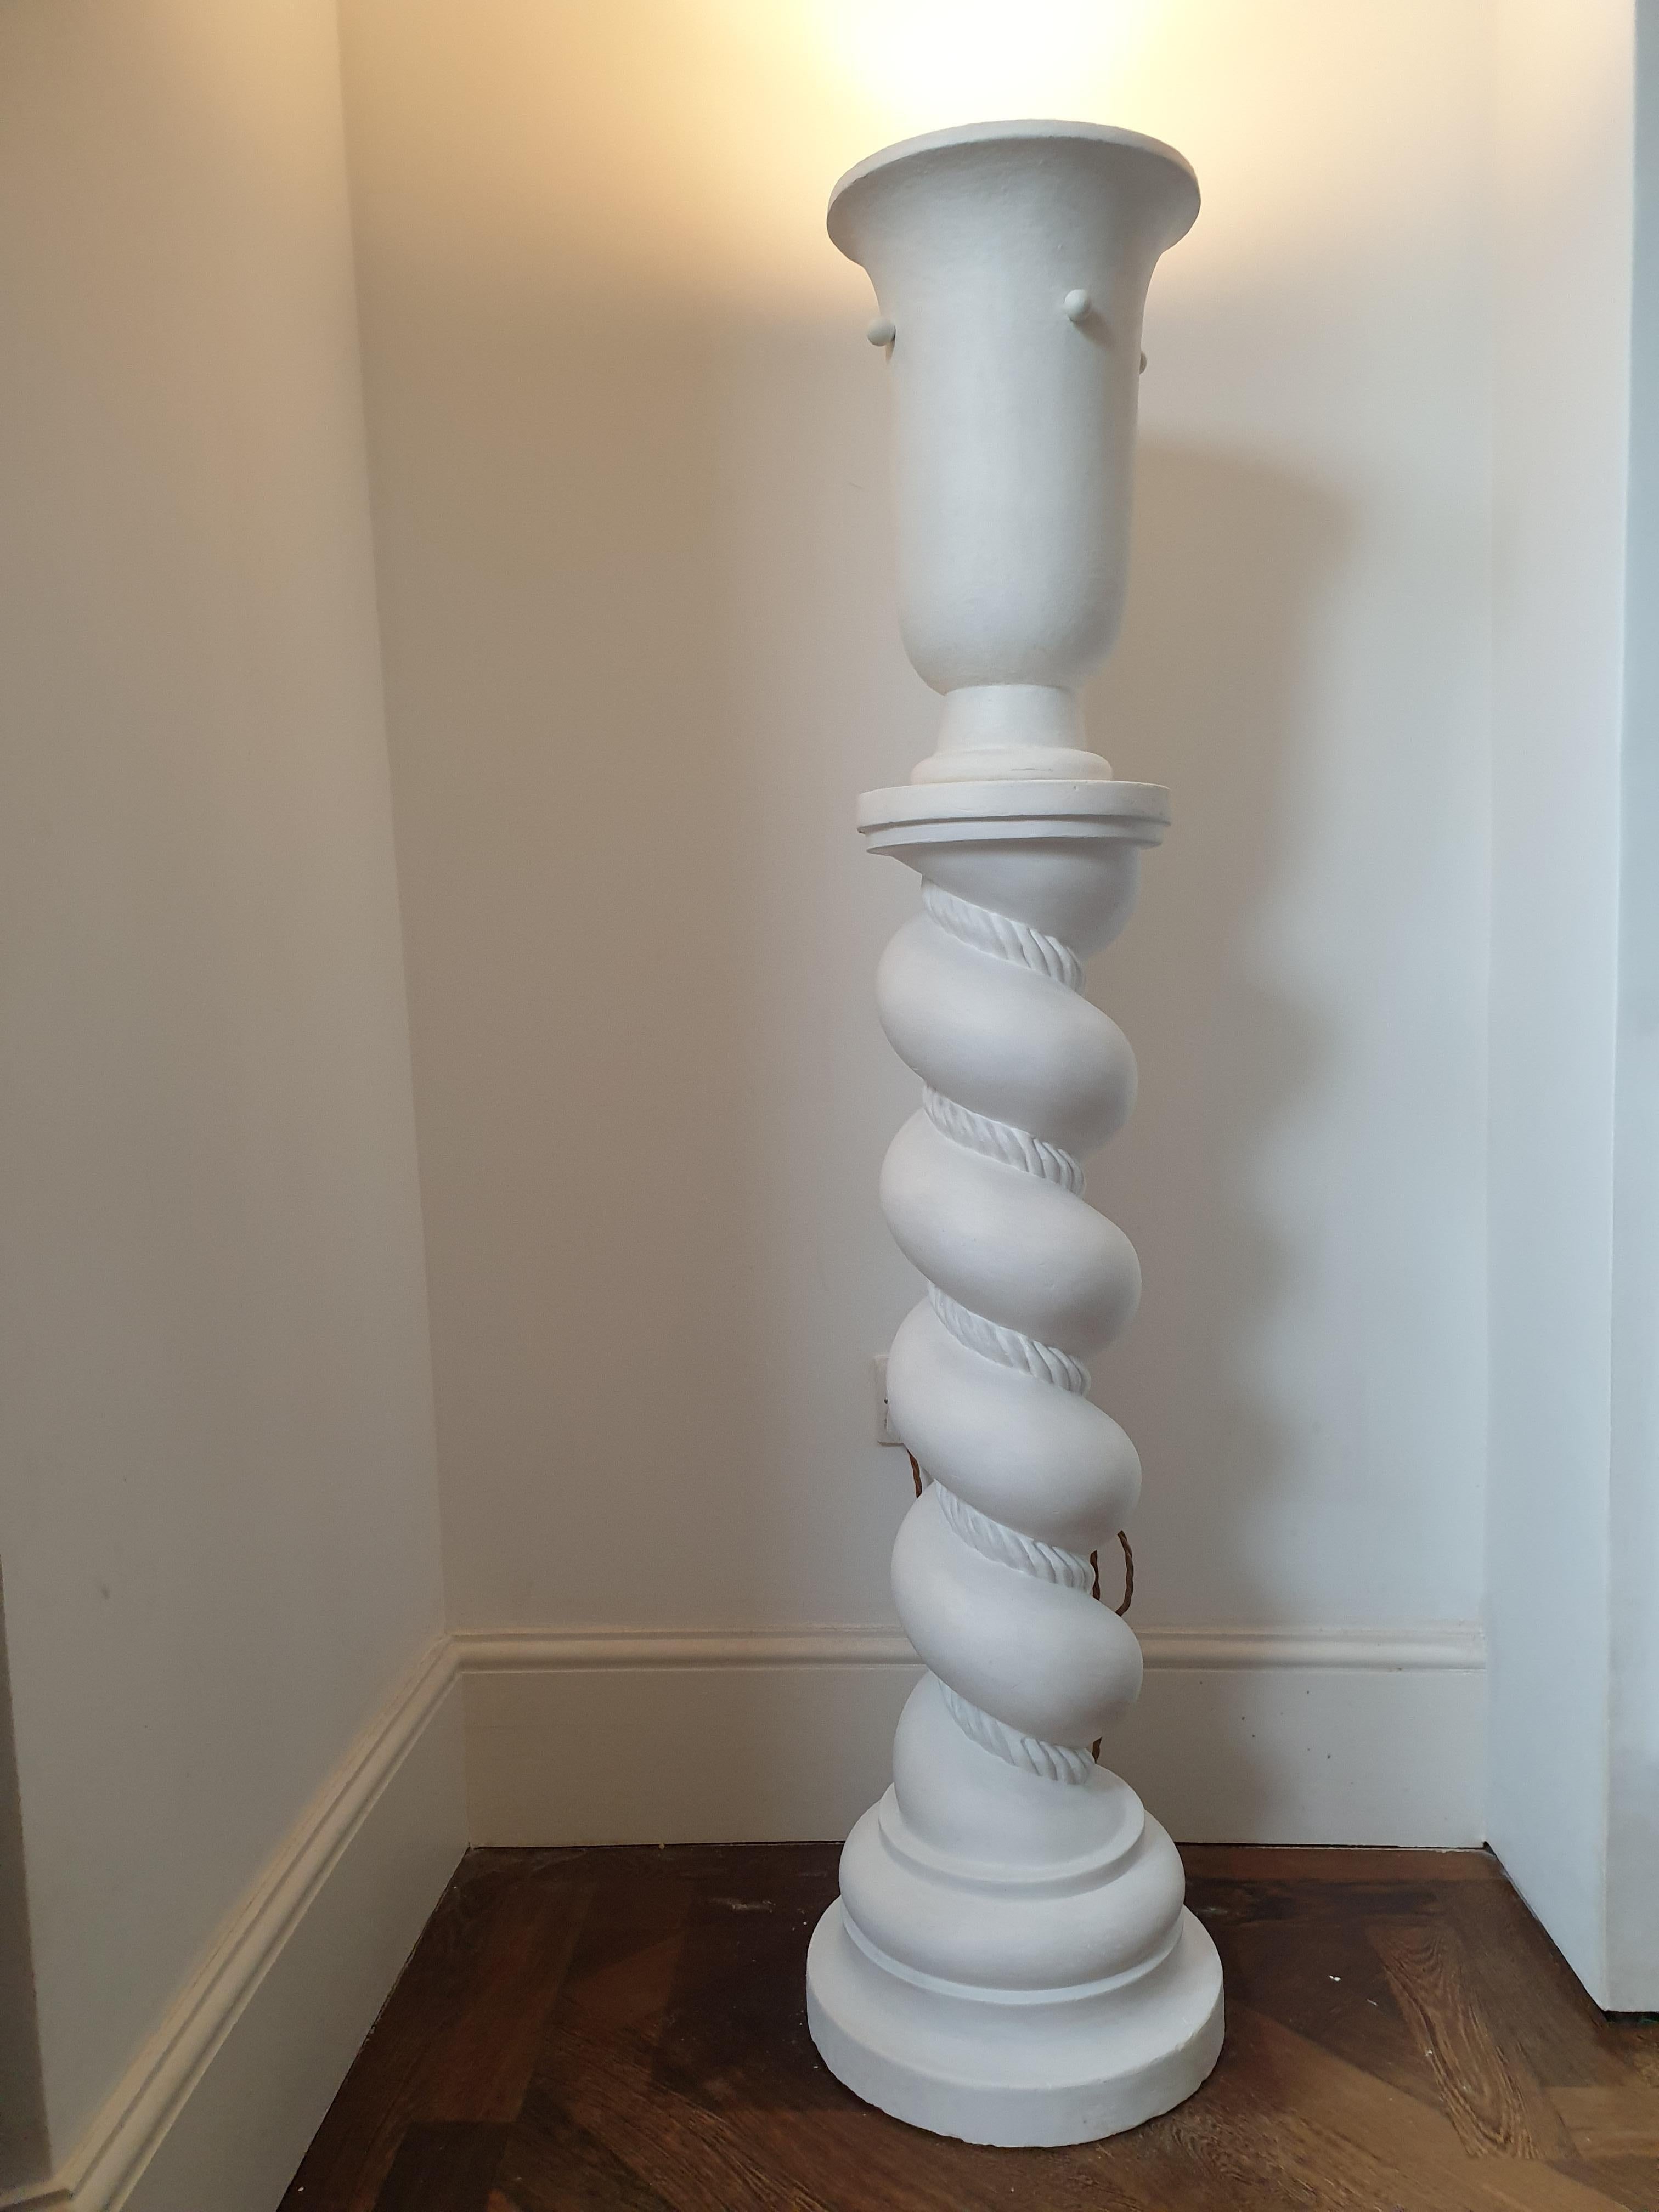 Plaster twisted column with unusual rope design and plaster uplighter.  It is rare to find such an unusual column with this rope design and coupled with the plaster urn uplighter it makes an interesting statement piece. This heavy column is stable